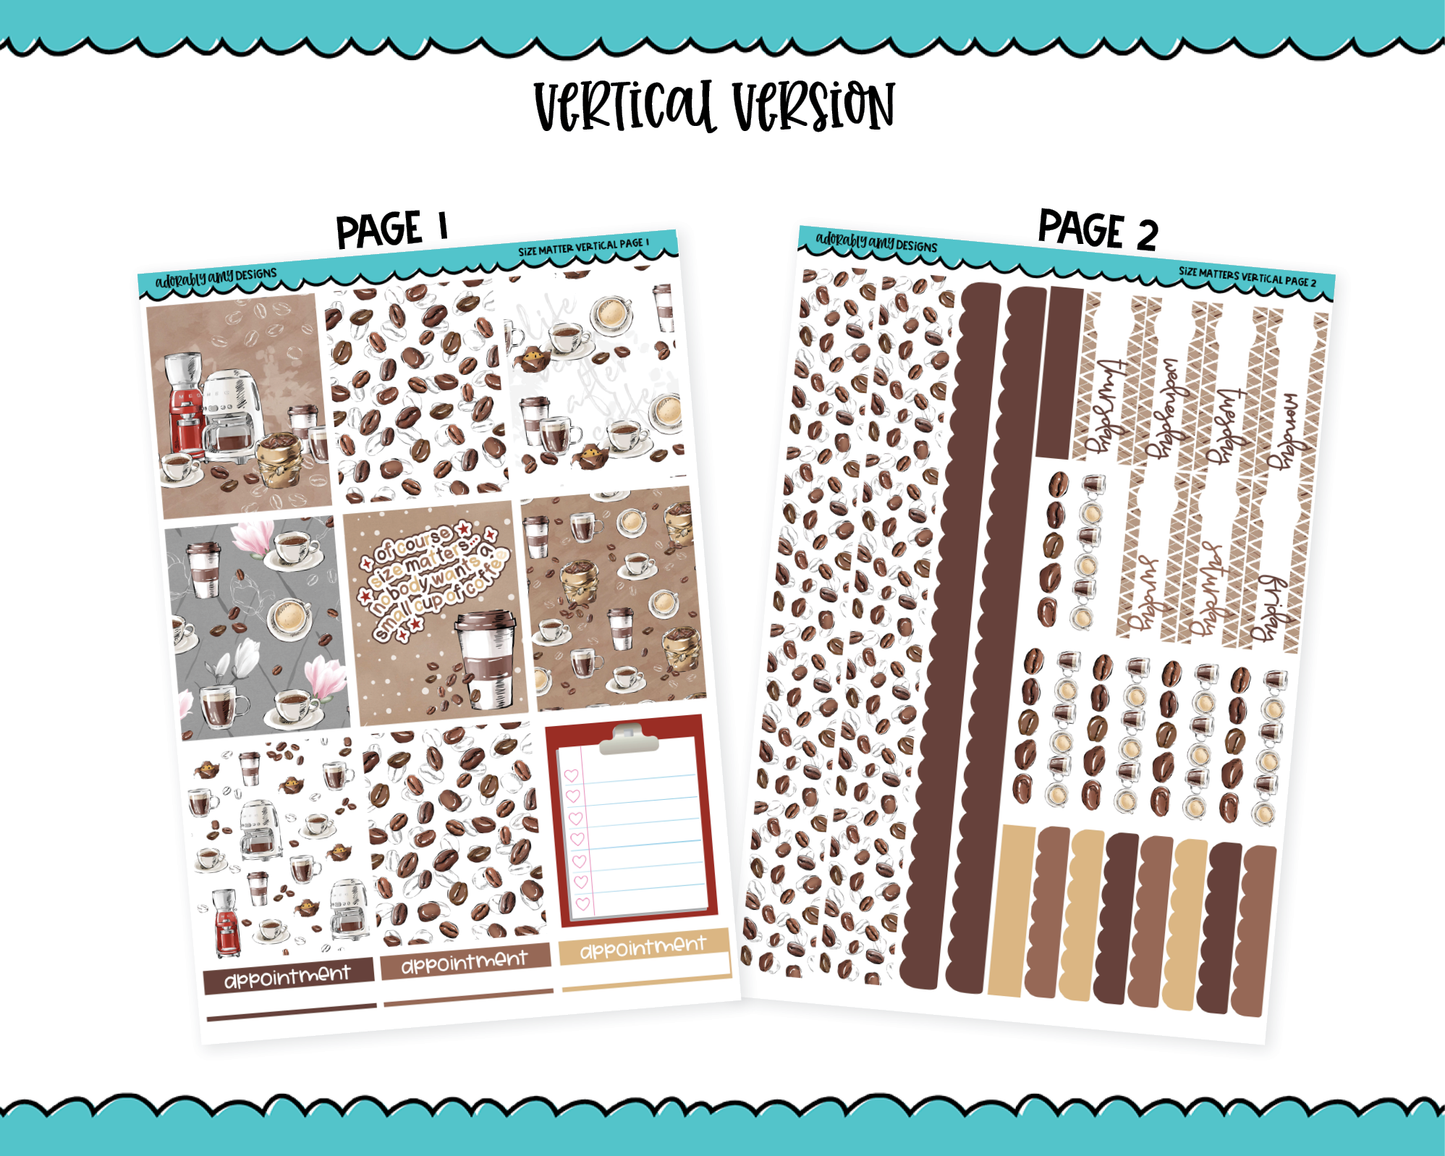 Vertical Size Matters Coffee Themed Planner Sticker Kit for Vertical Standard Size Planners or Inserts